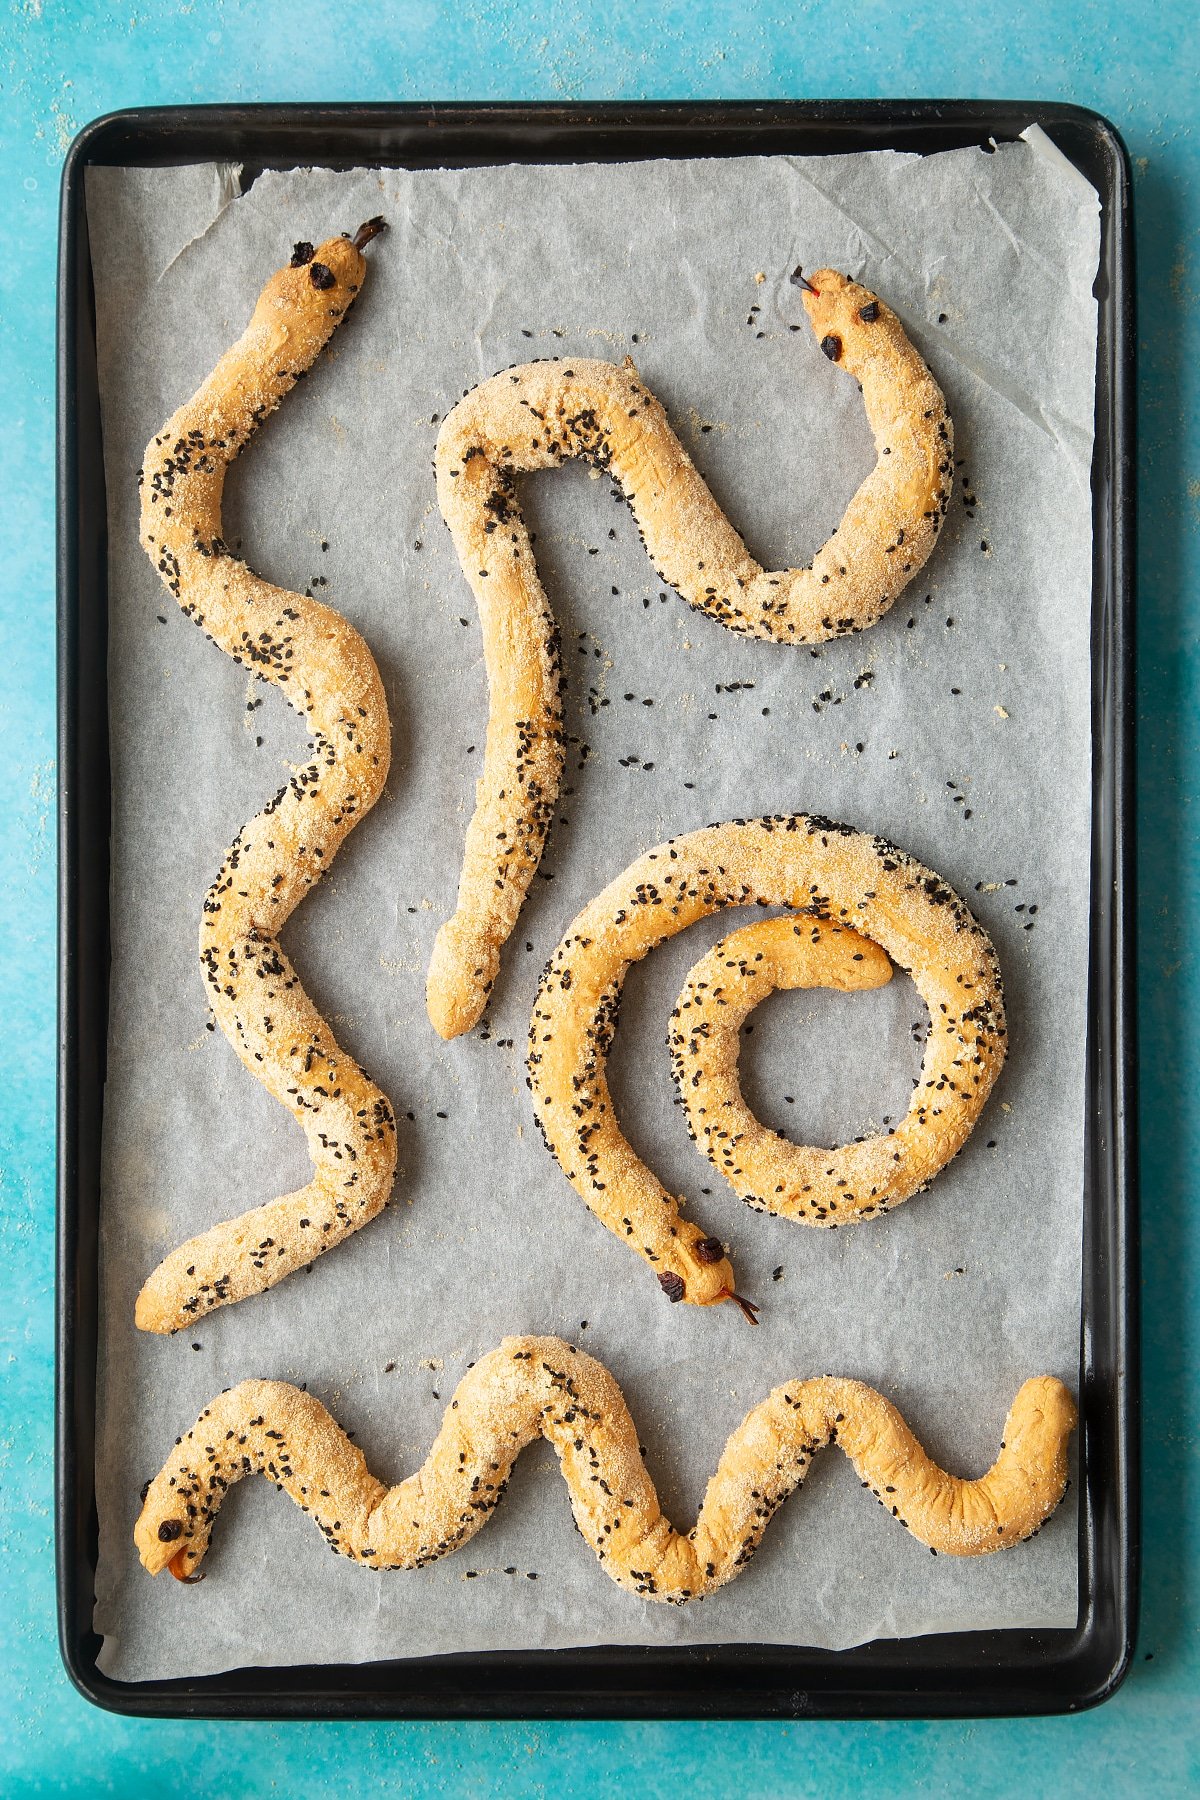 A lined baking tray with freshly baked bread snakes. 